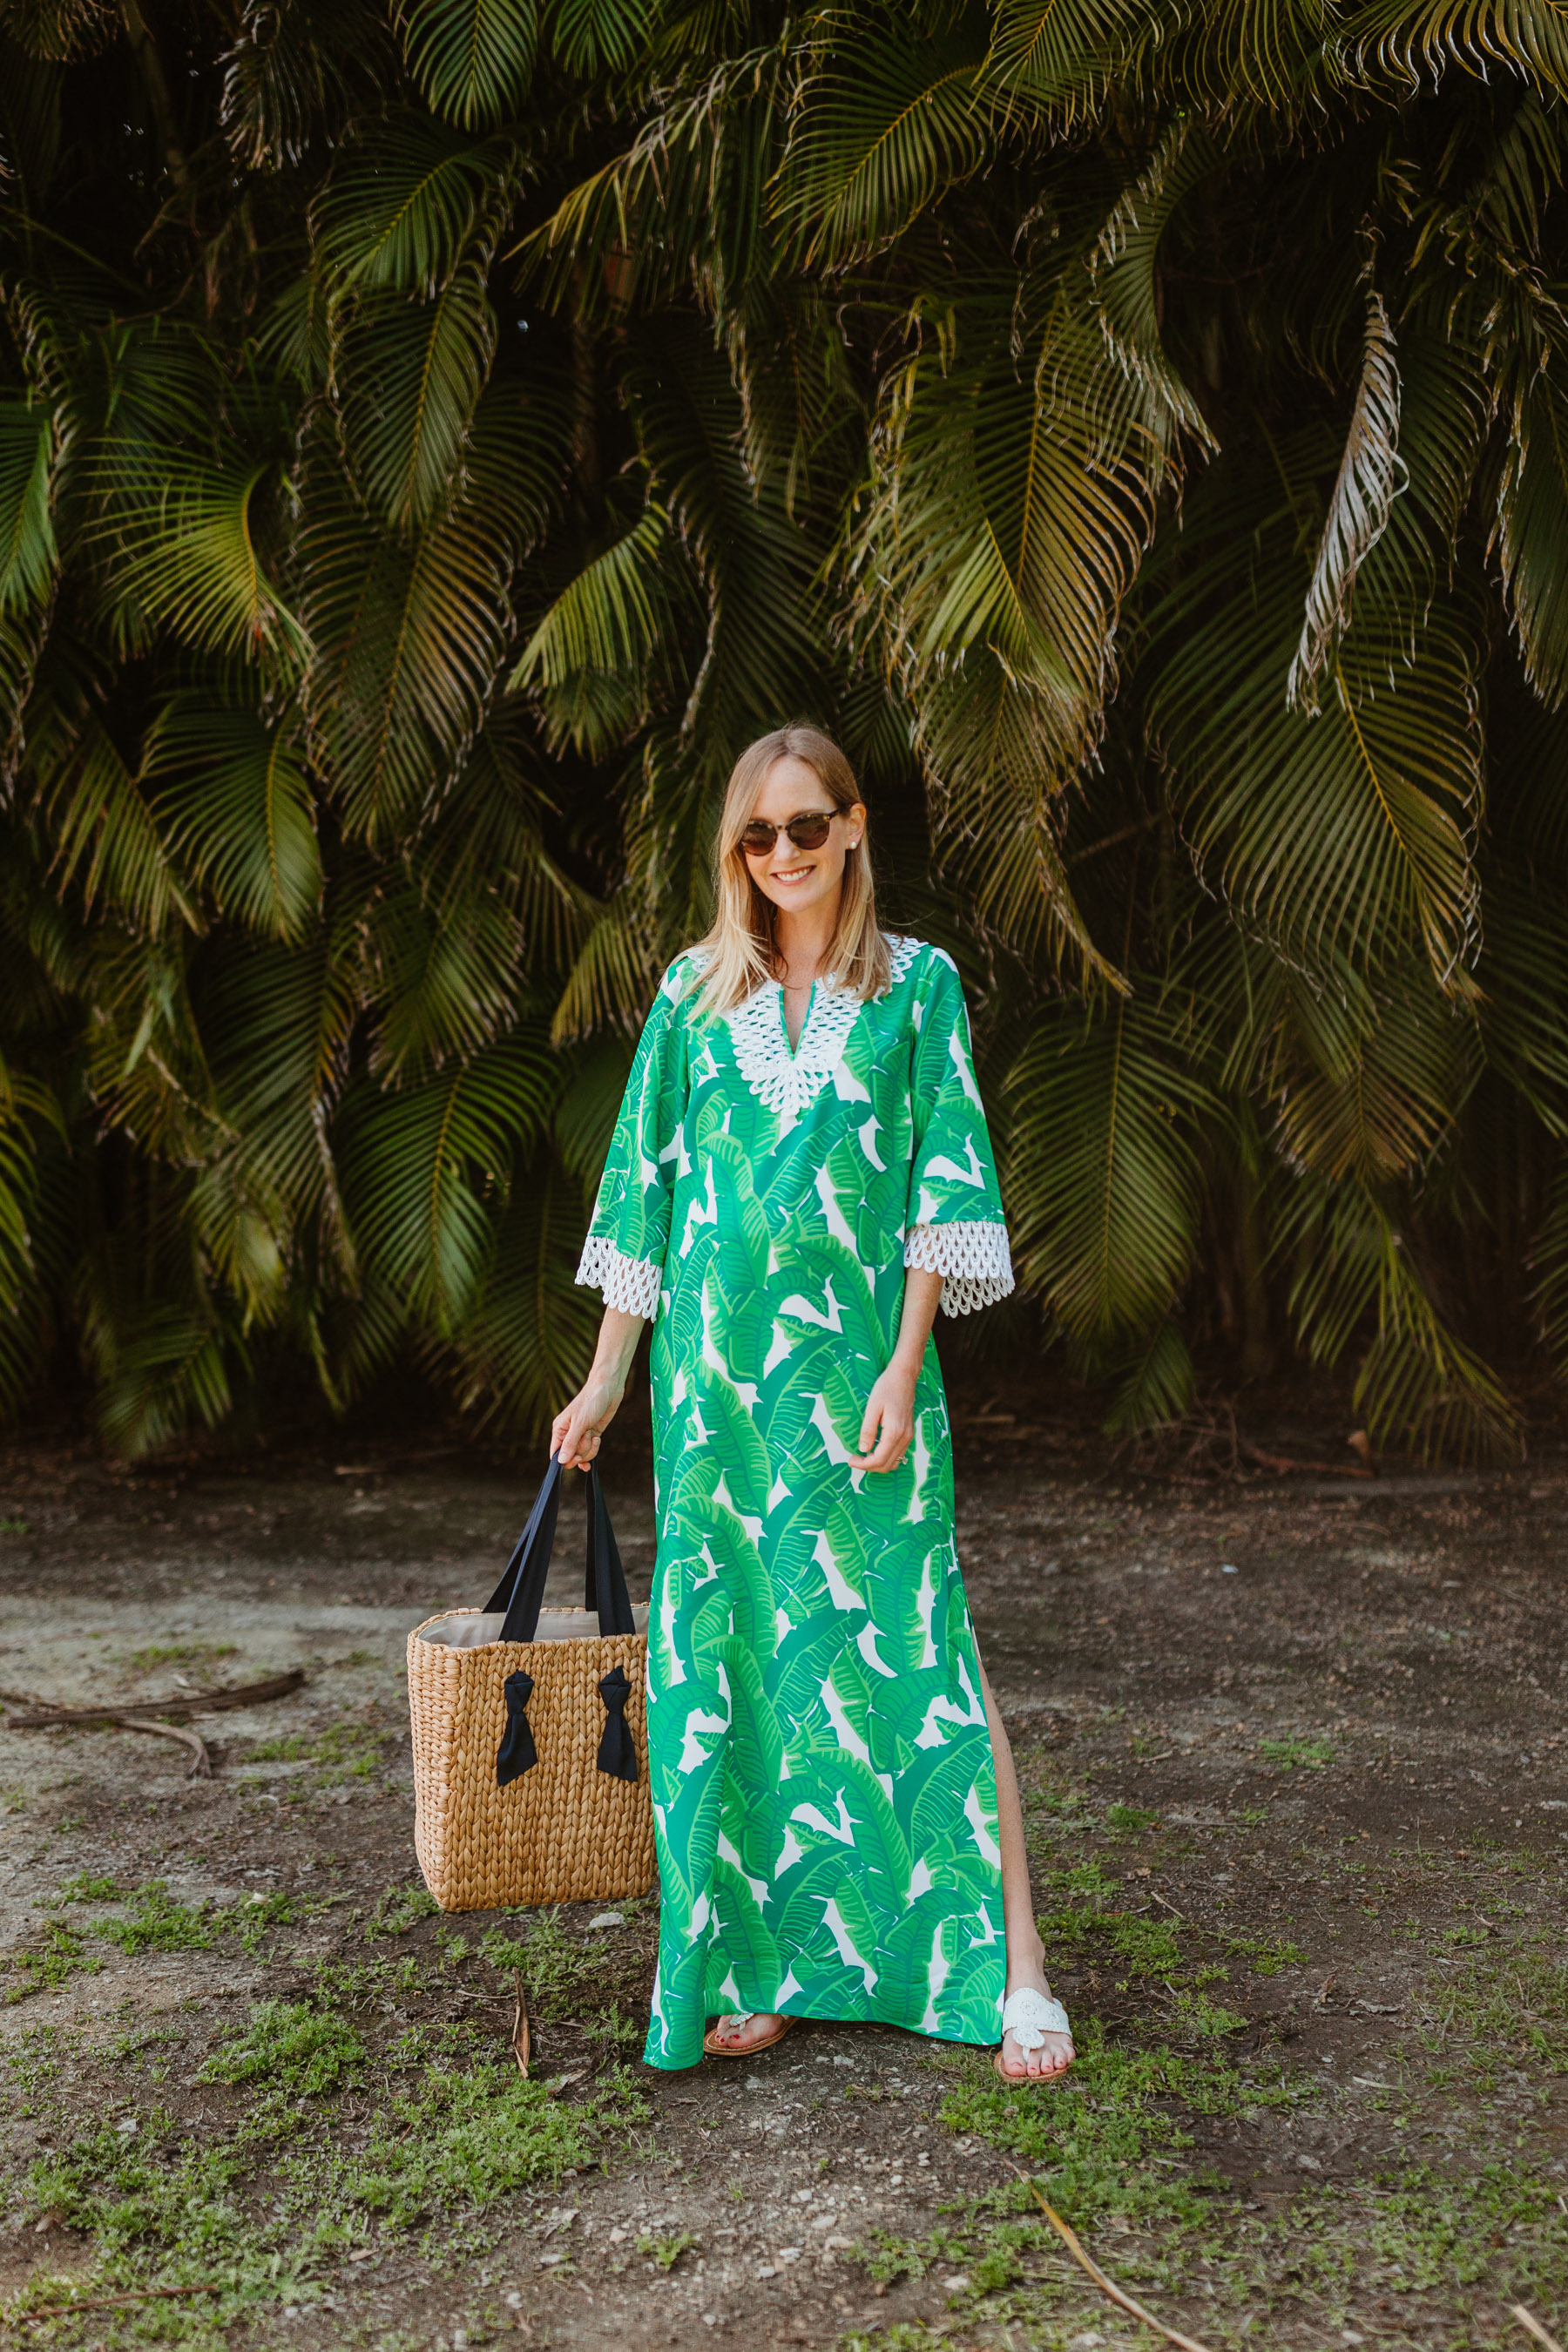 Kelly's outfit: Sail to Sable Banana Leaf Palm Dress / Jack Rogers / Pamela Munson Woven Tote 